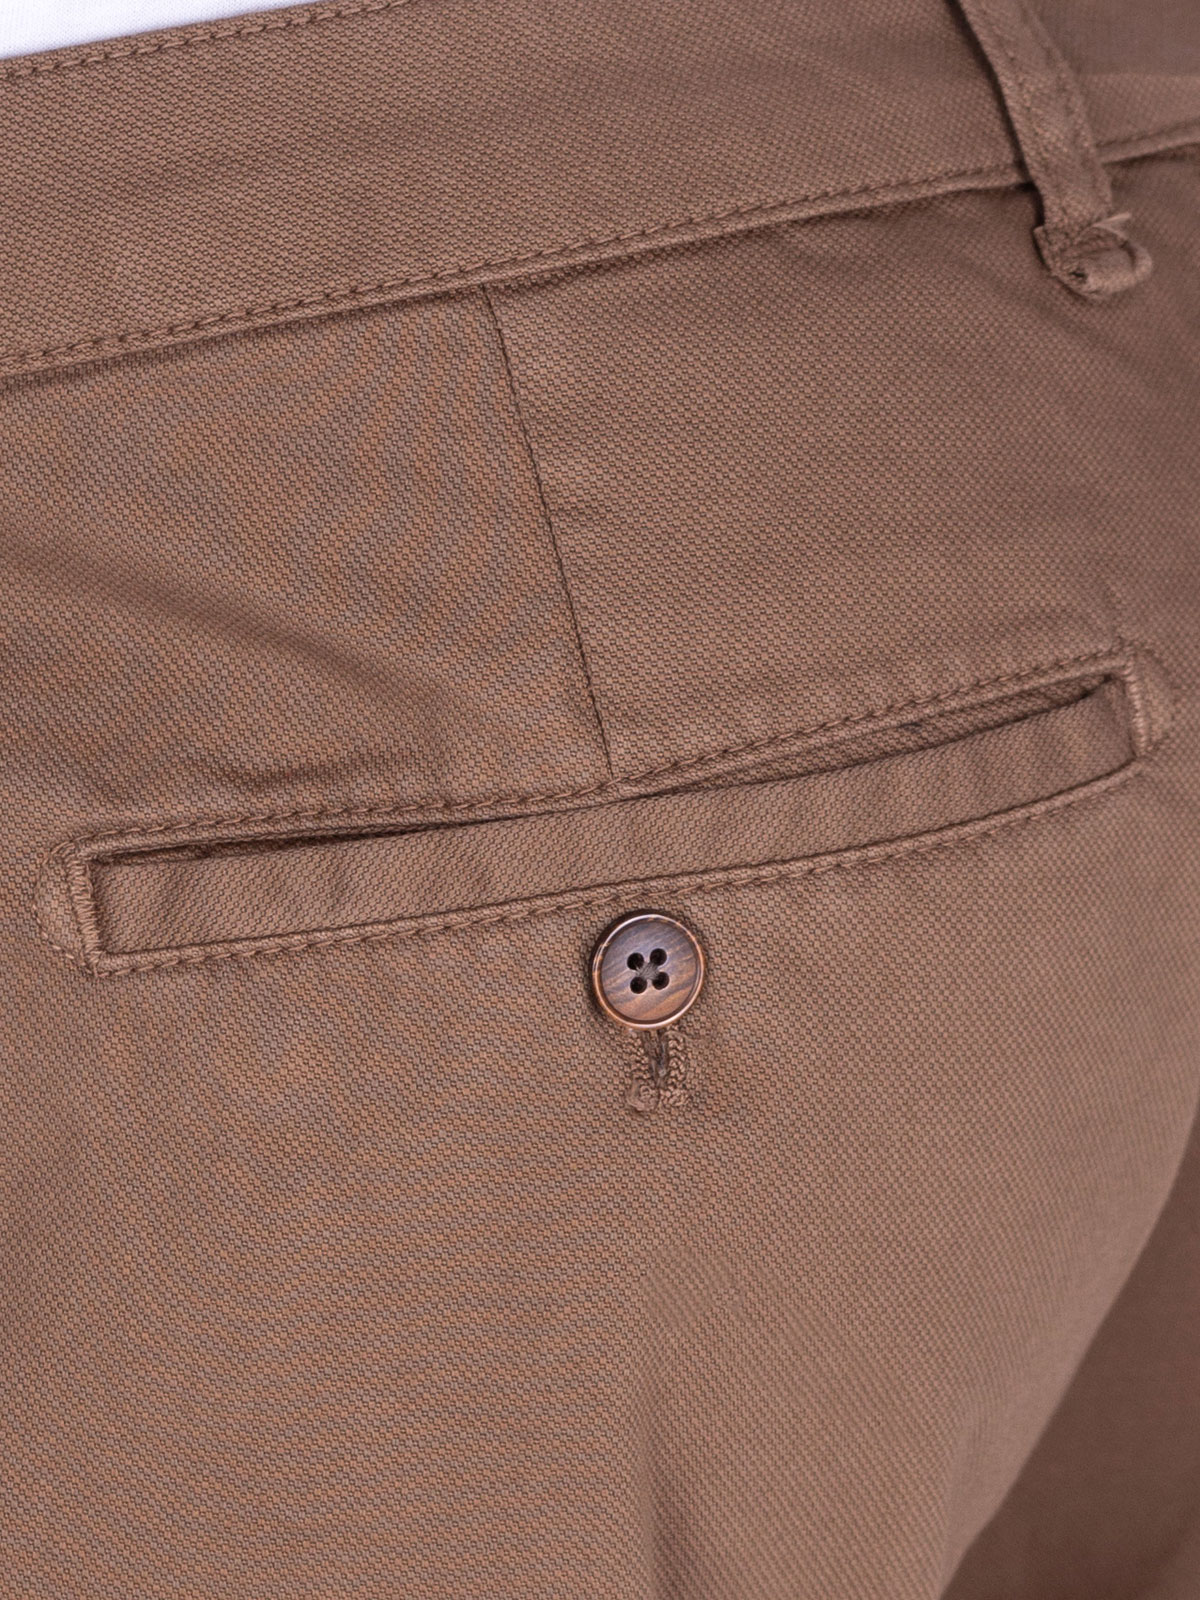 Fitted trousers in camel color - 60279 € 49.49 img4